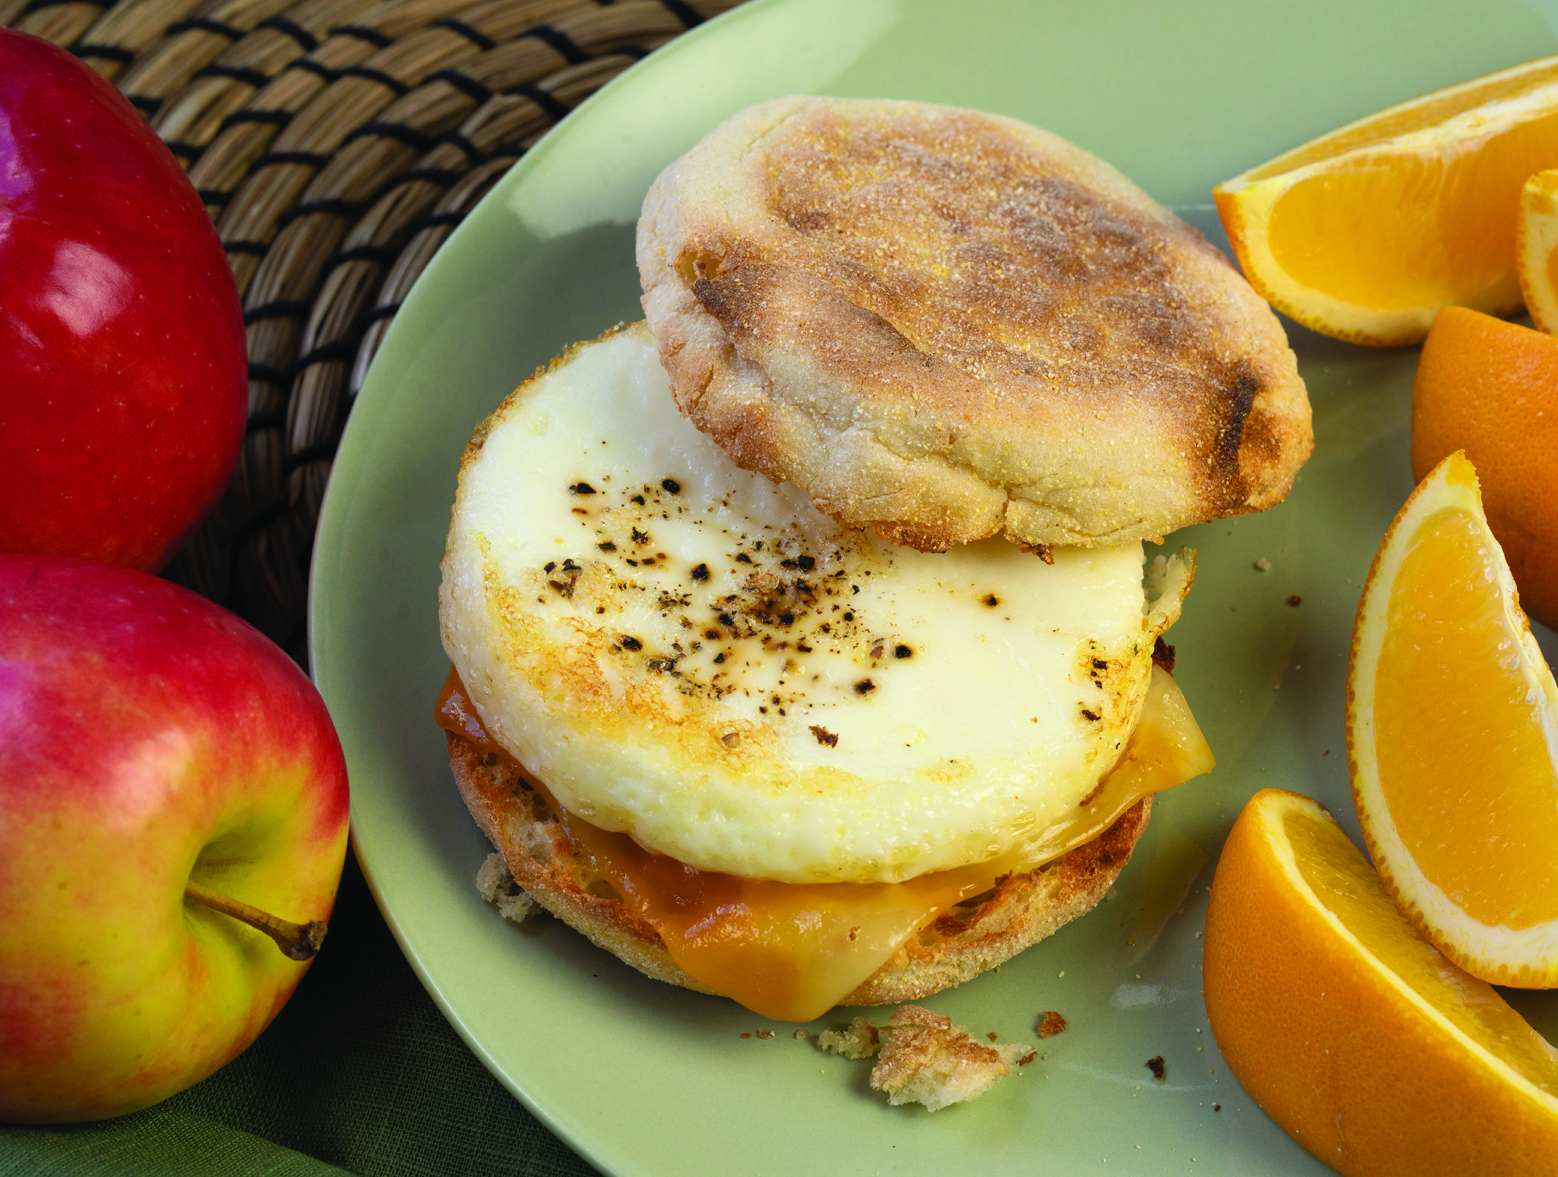 Easy make ahead English muffin breakfast sandwich with apples and orange slices